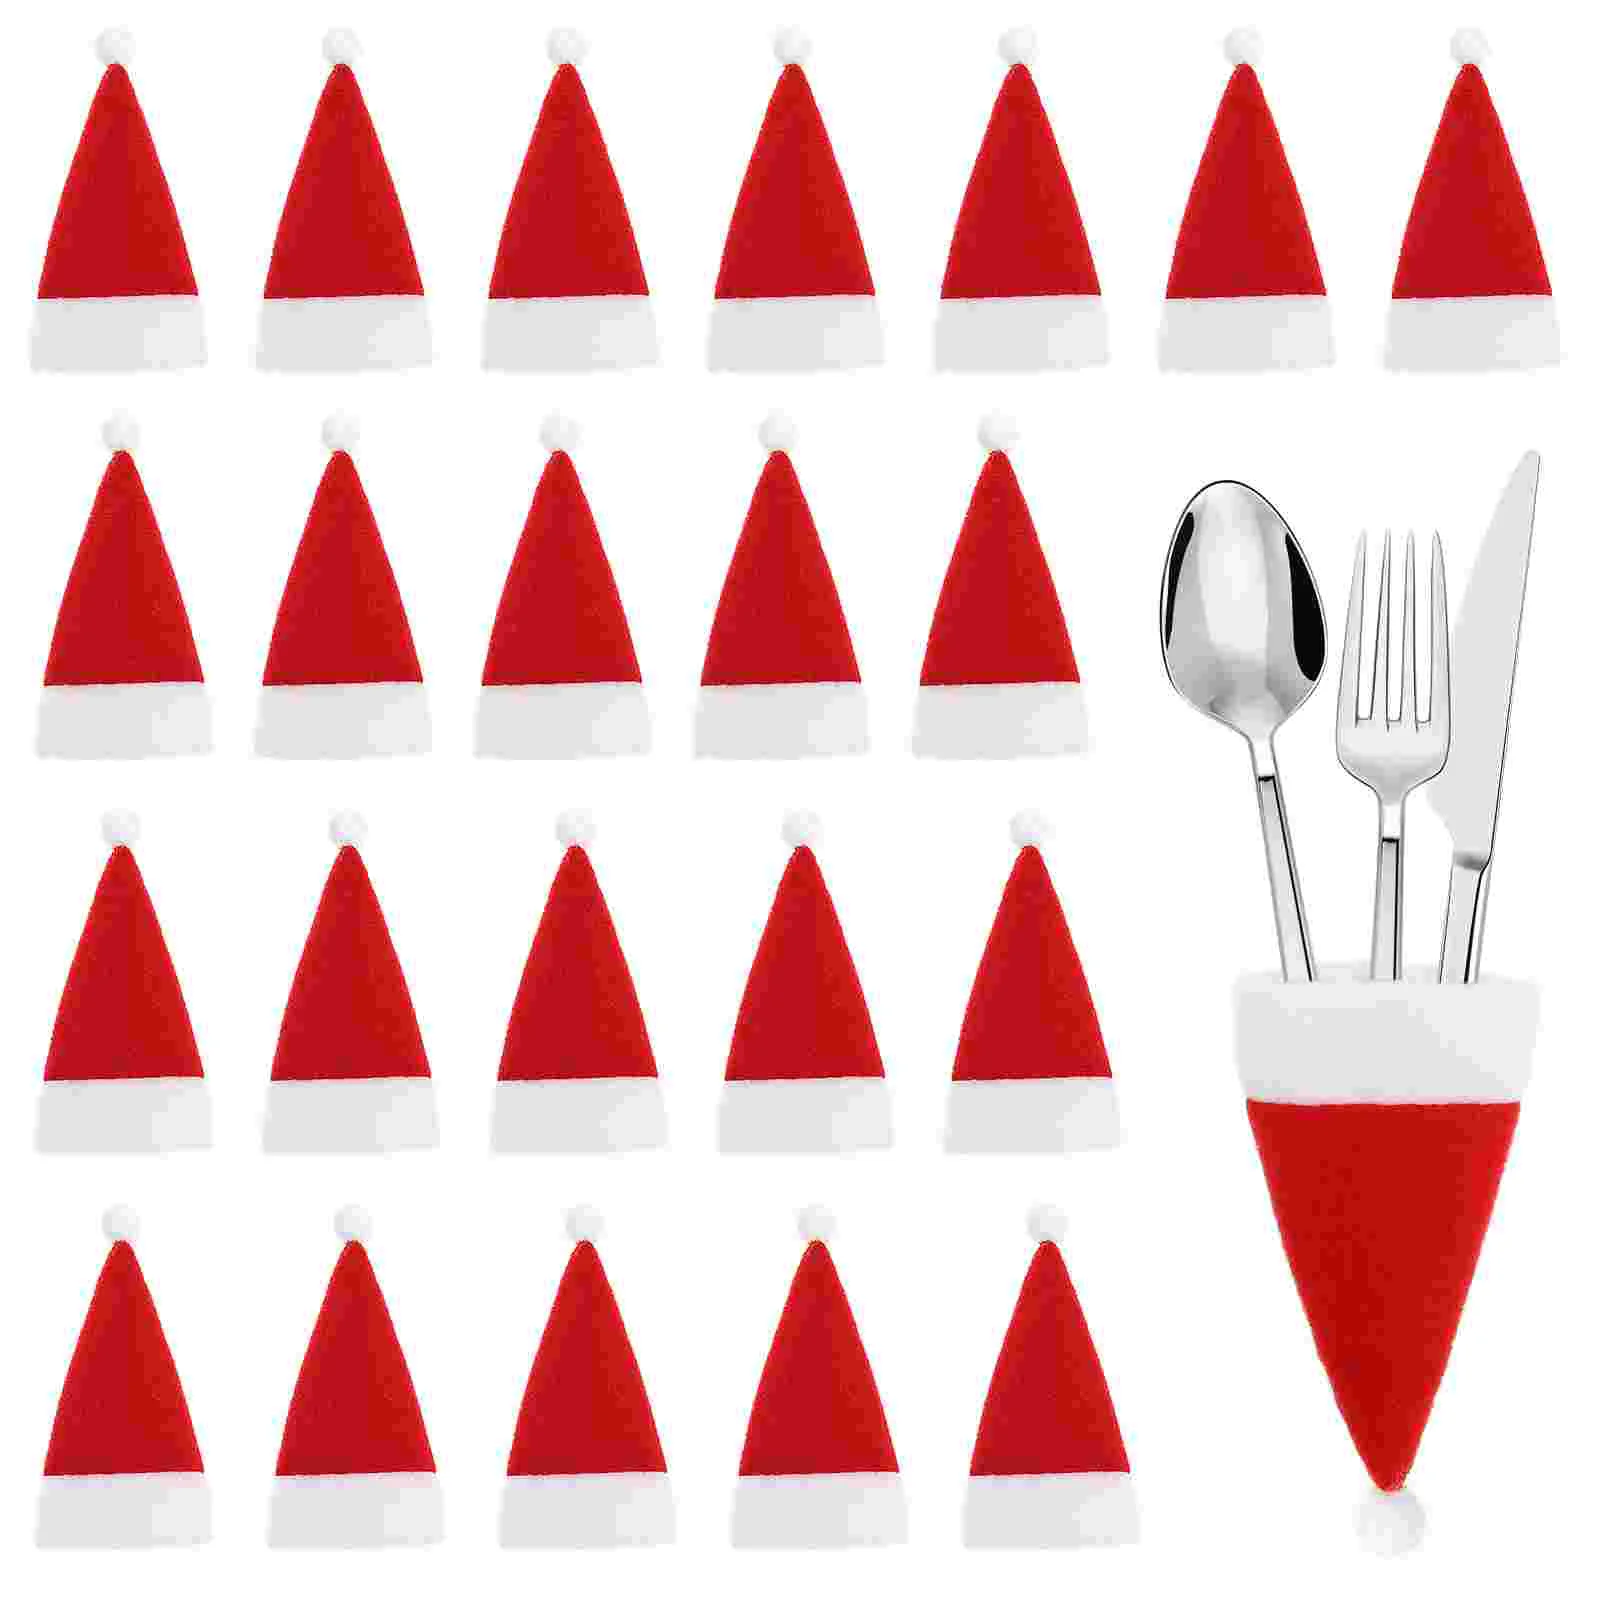 

30 Pcs Reds Hatations Xmas Crafts Bottle Covers Silverware Holder Cutlery